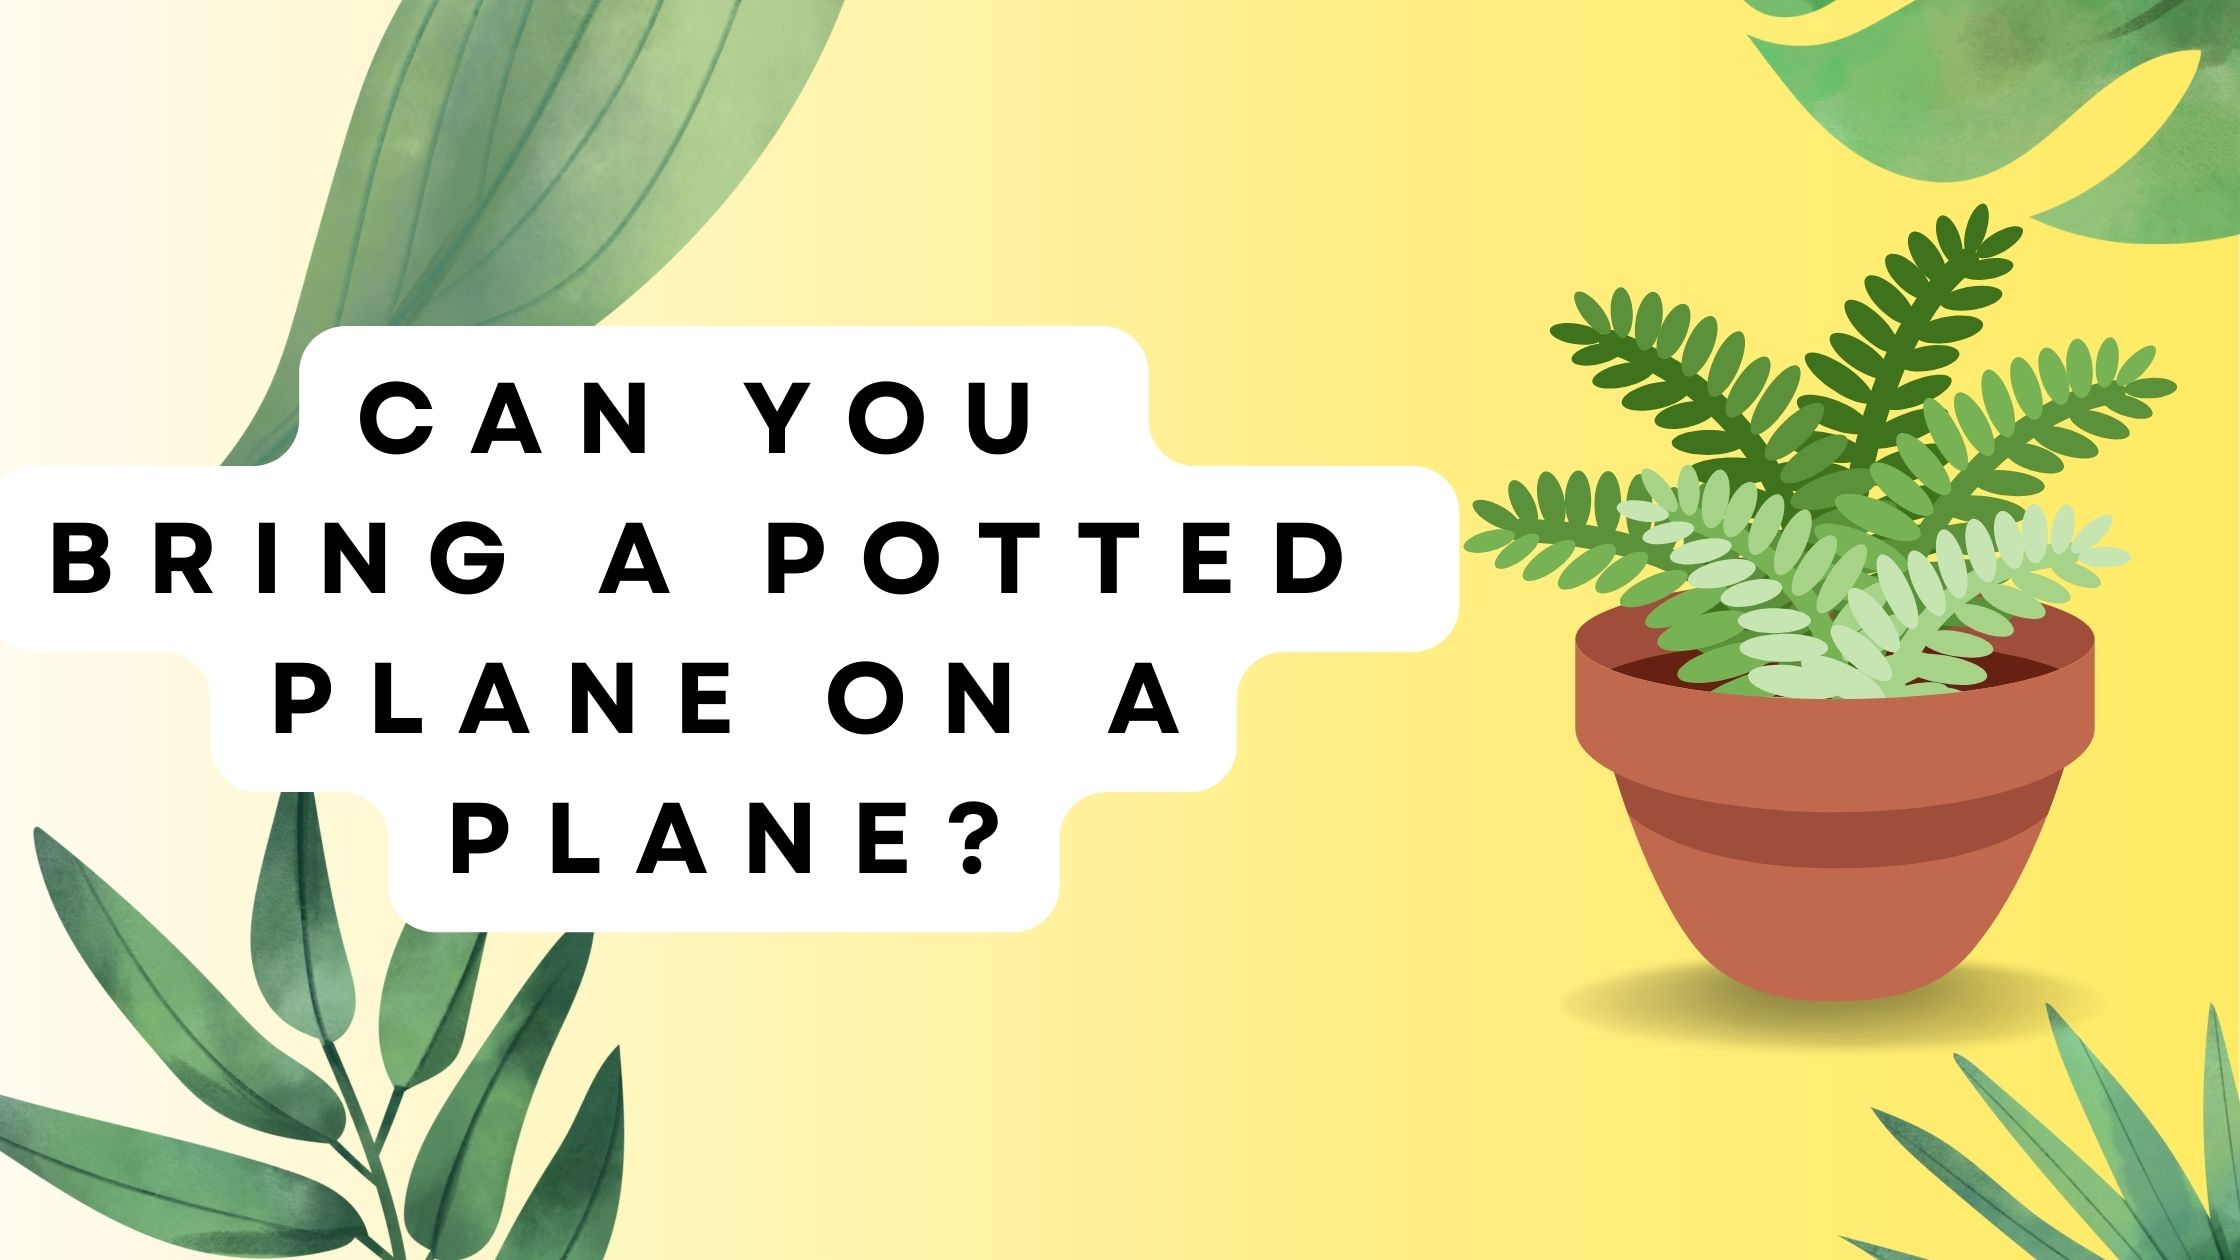 Can You Bring A Potted Plant On A Plane?